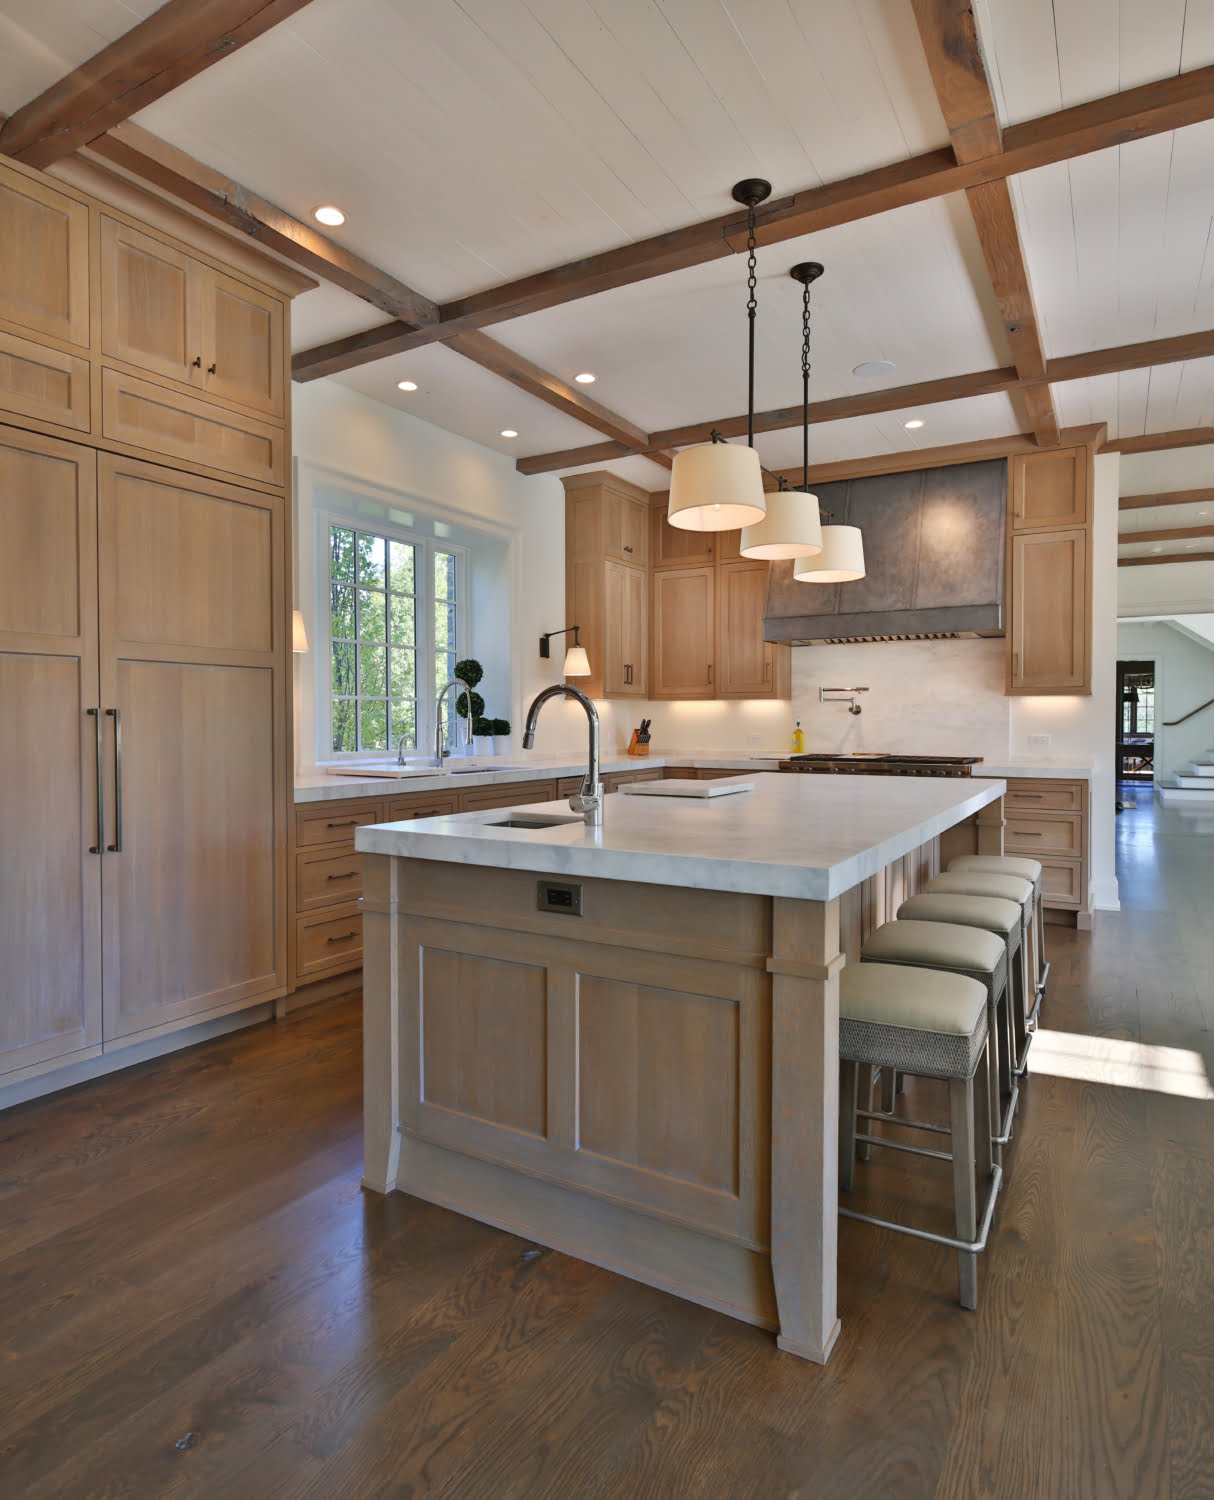 Natural wood cabinets with matching island details